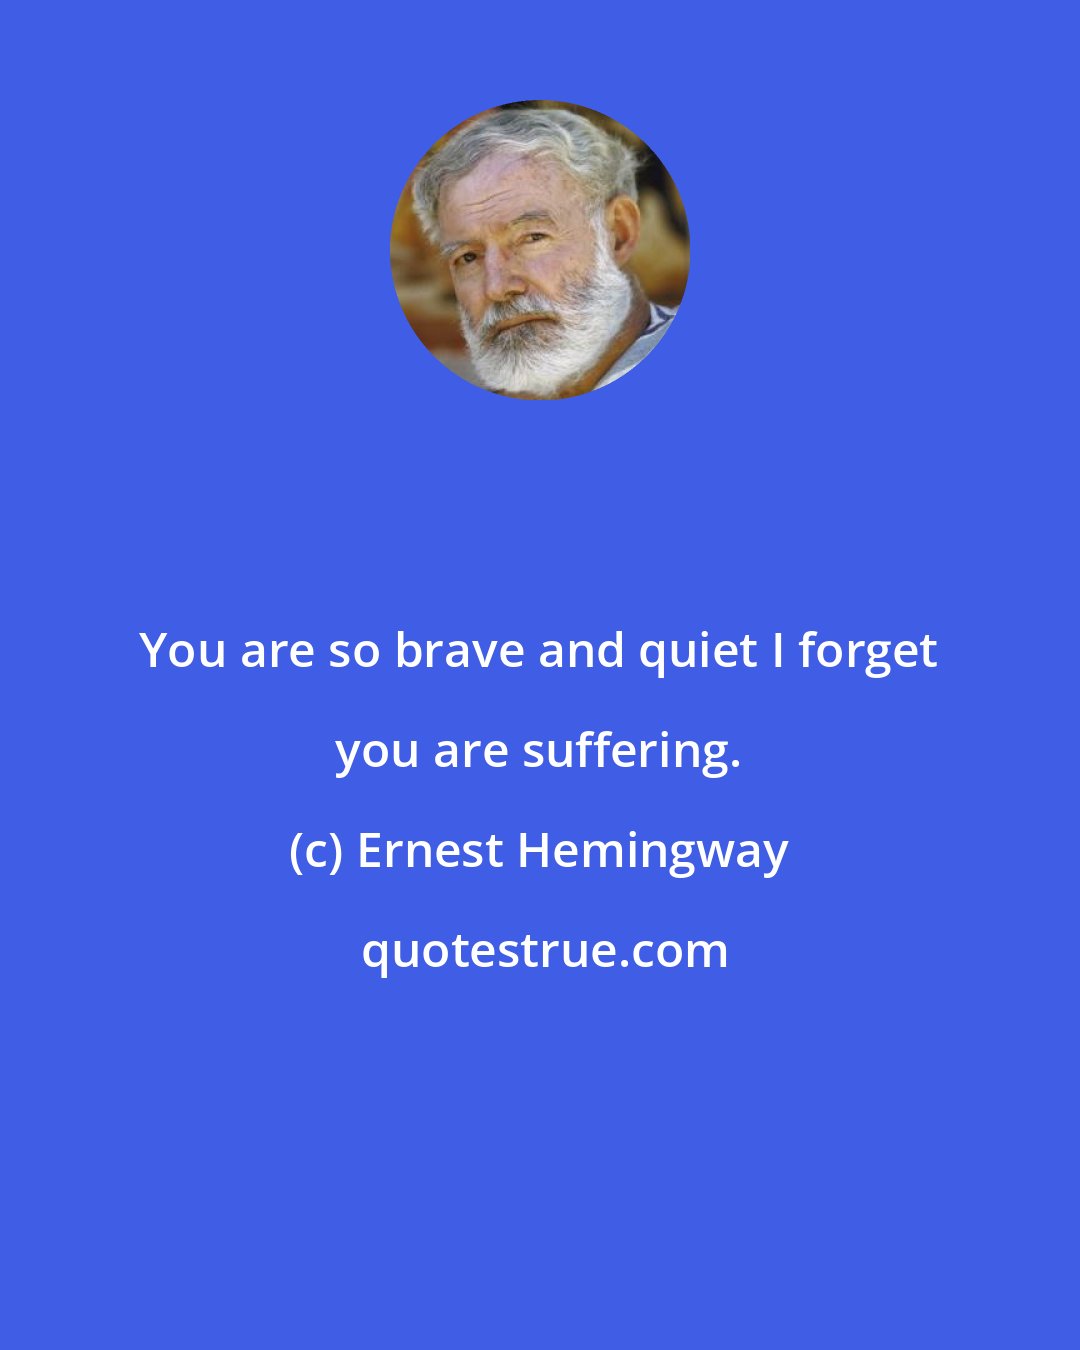 Ernest Hemingway: You are so brave and quiet I forget you are suffering.